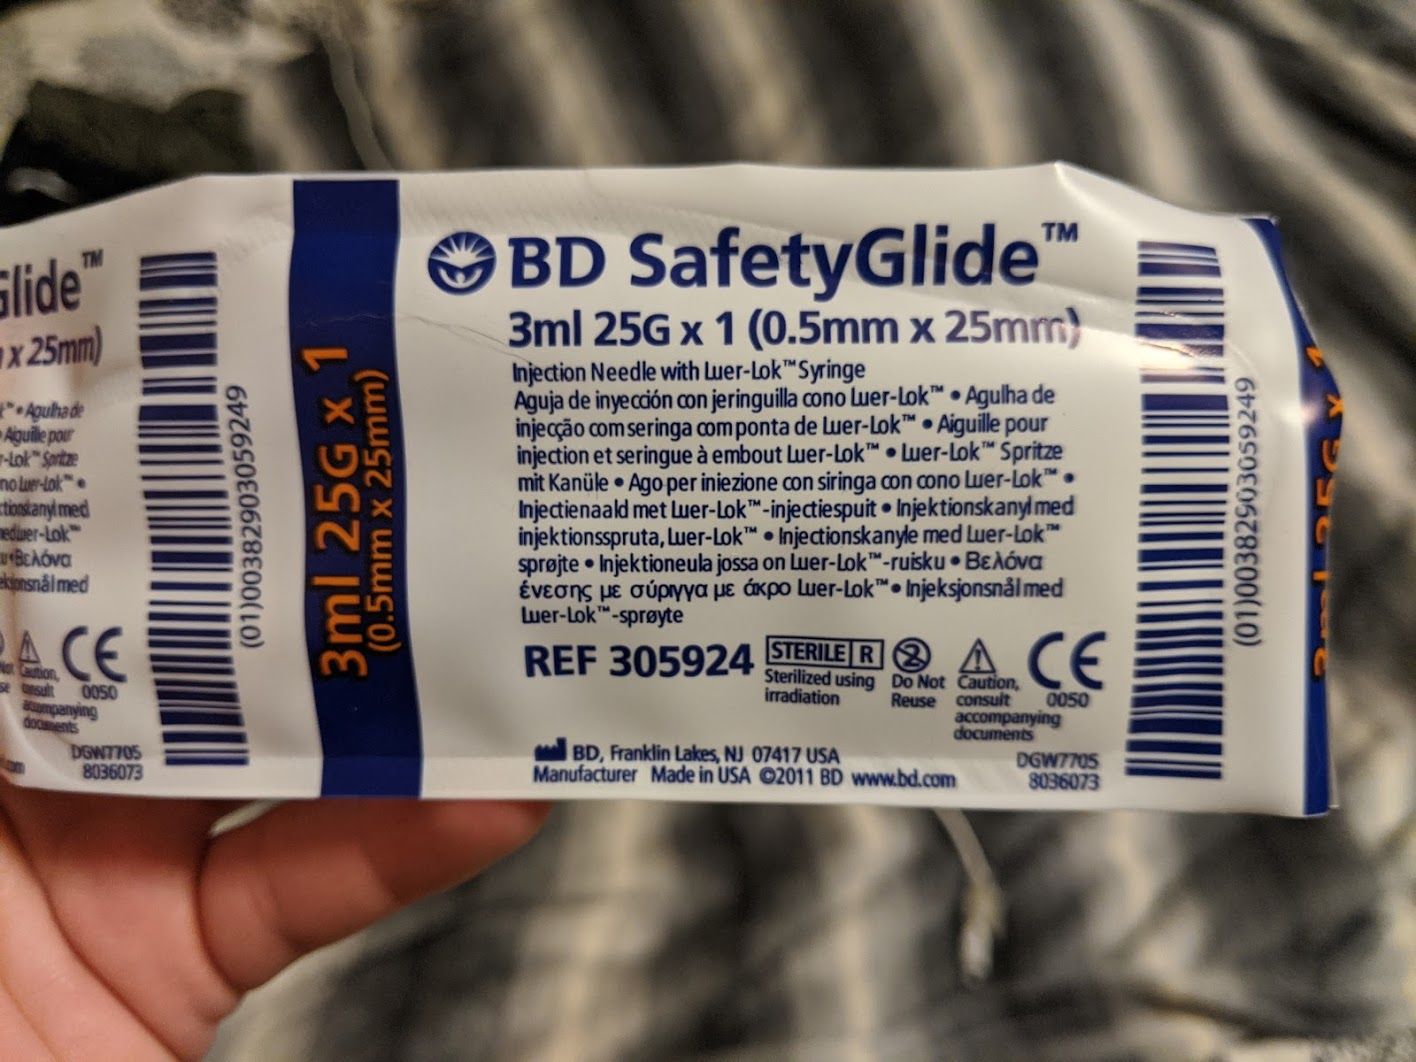 The packaging for a 25gauge needle with some small multi-lingual medical text on it.